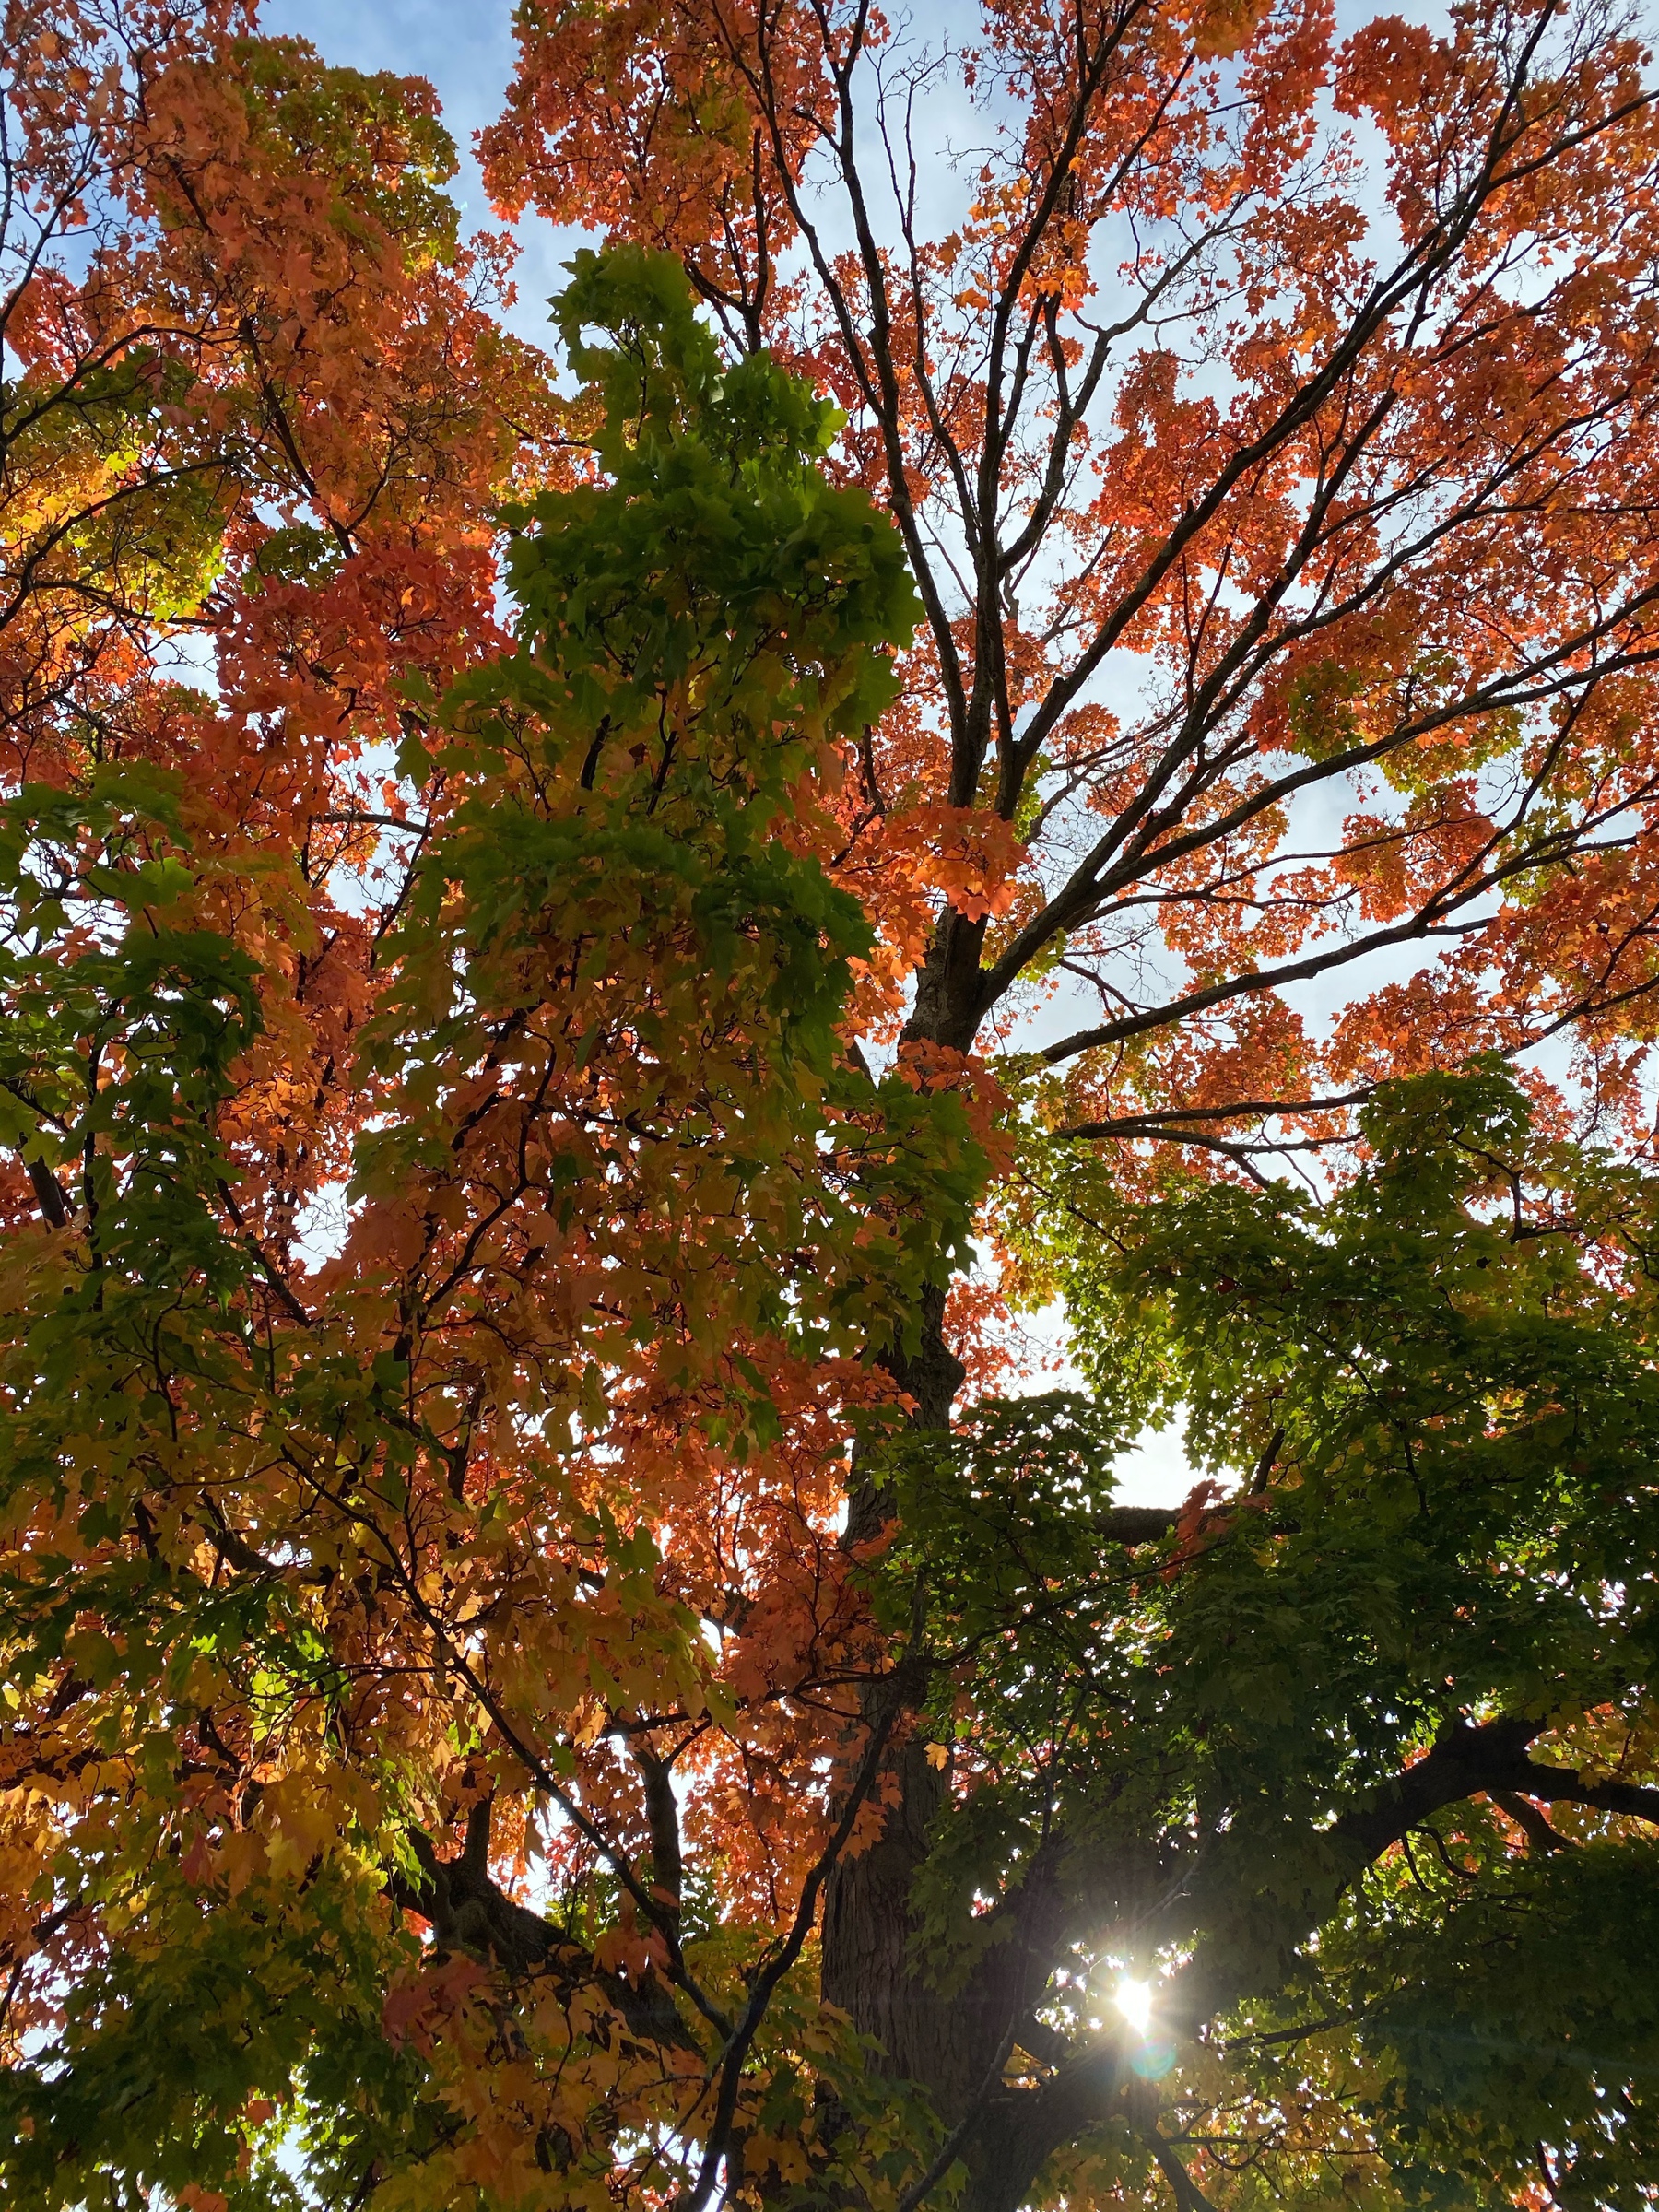 View from below of tree branches with a mix of green and red leaves, the sun shining from behind a low branch.